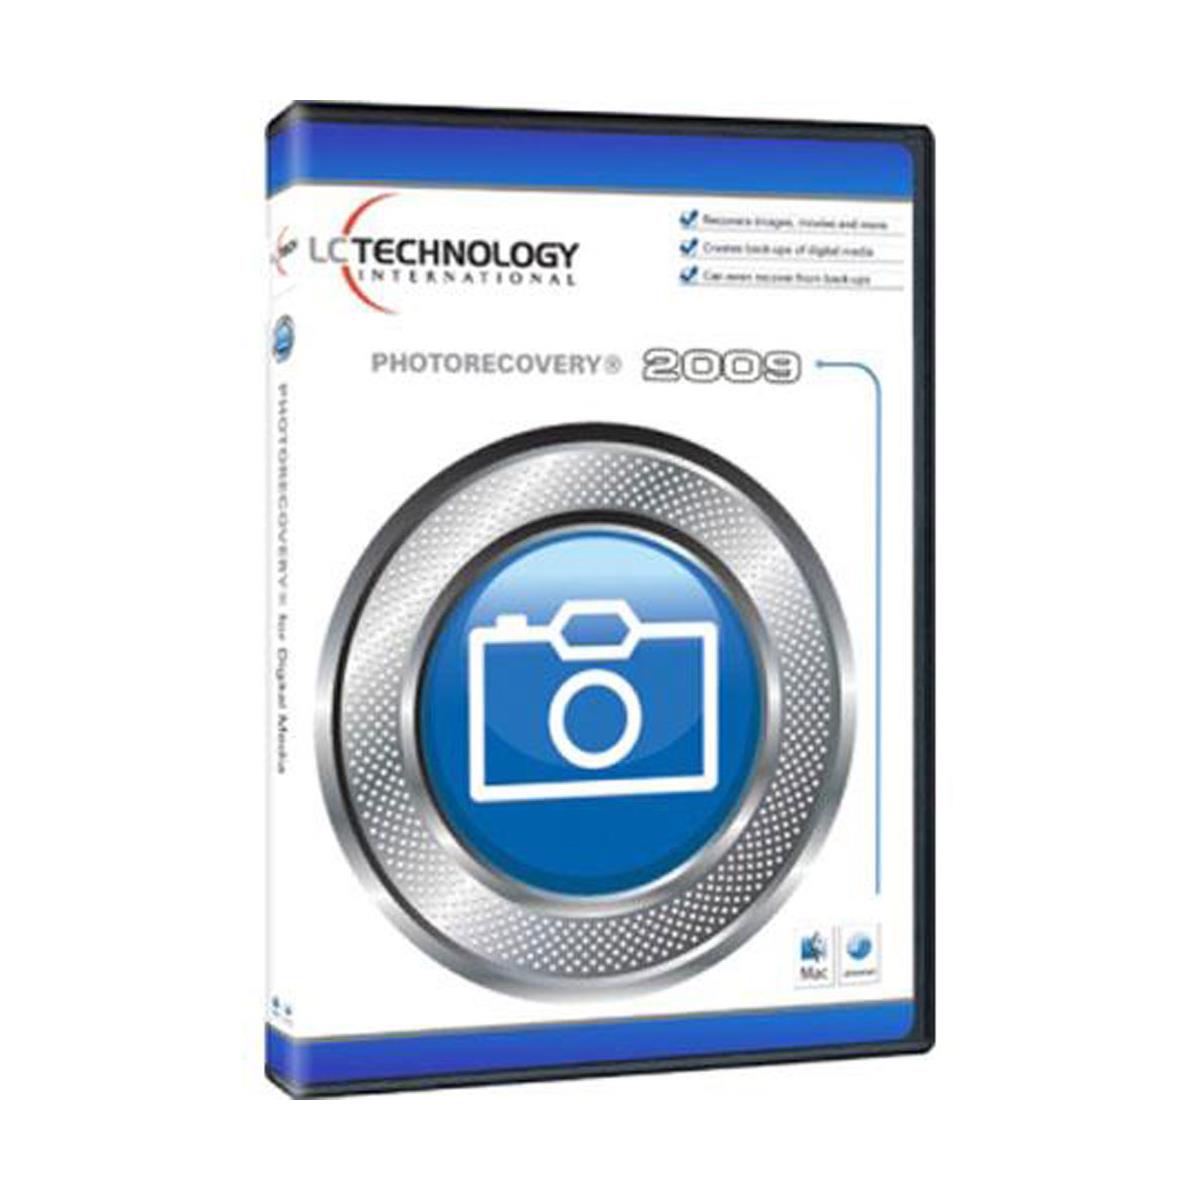 Image of LC Technology PhotoRecovery 2009 for Mac